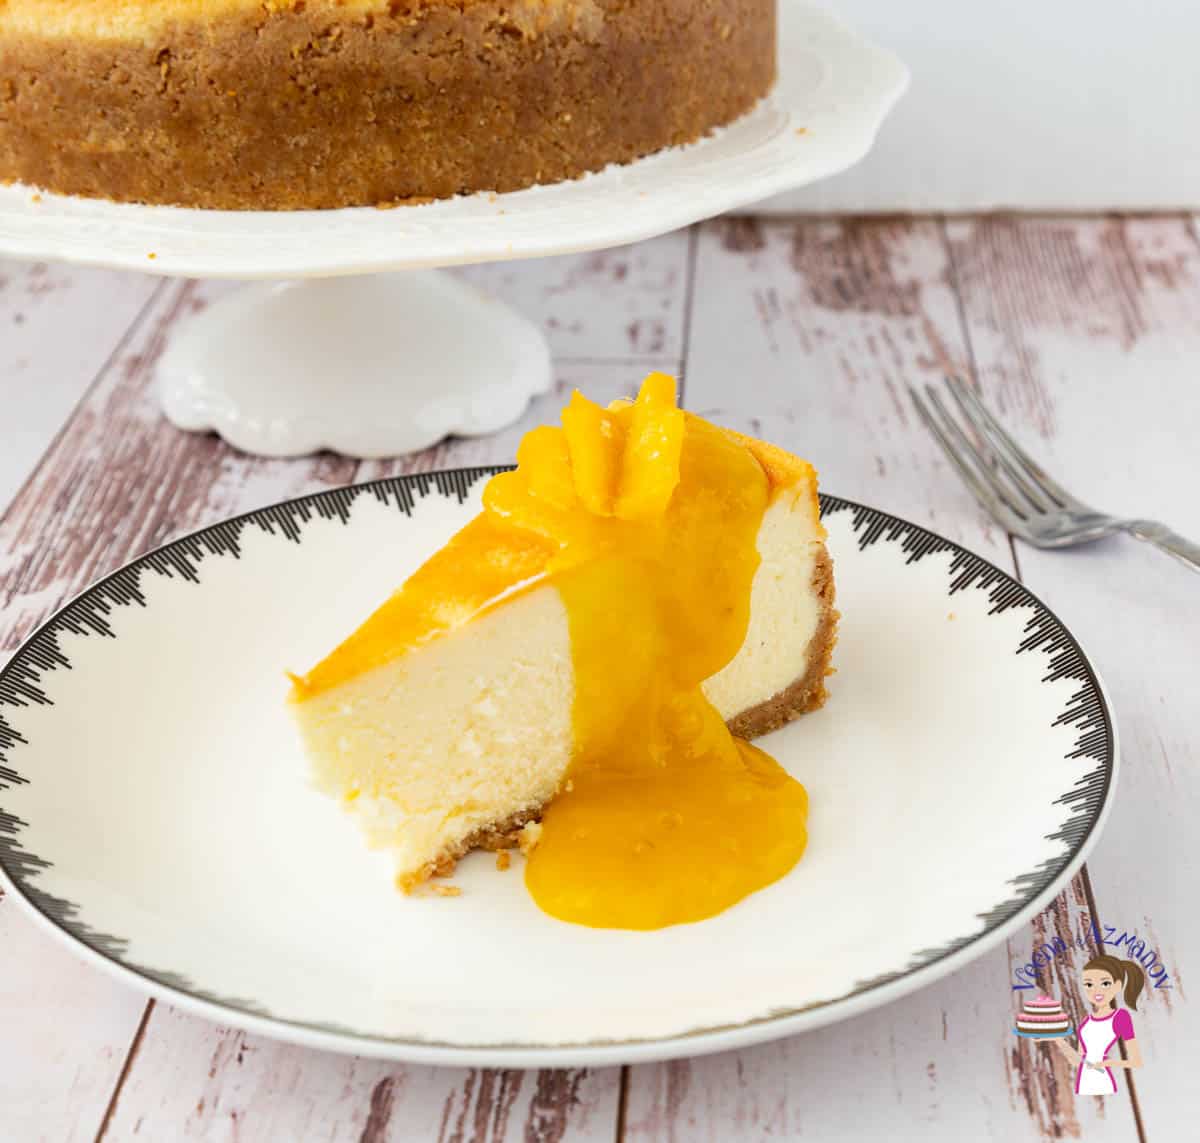 A slice of mango cheesecake on a plate.